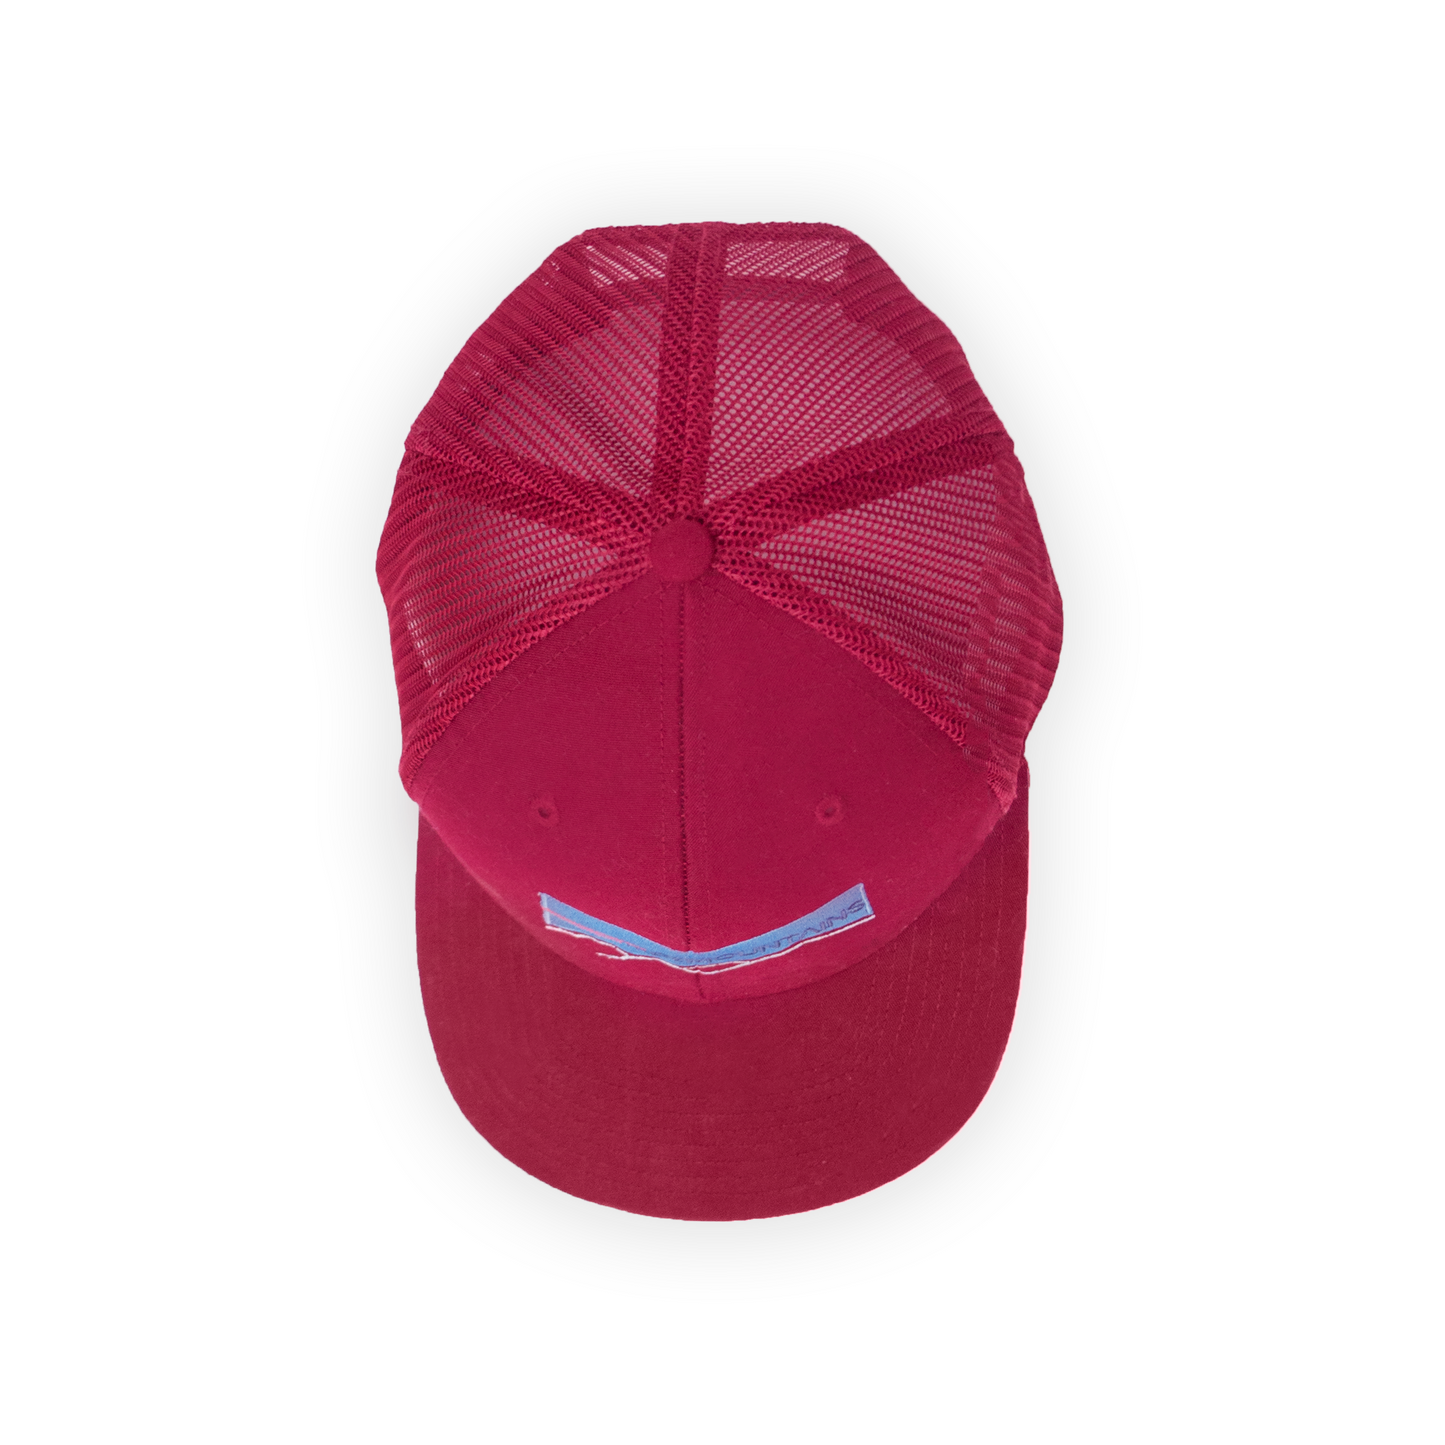 Of These Mountains Ruby Mountain Trucker Hat